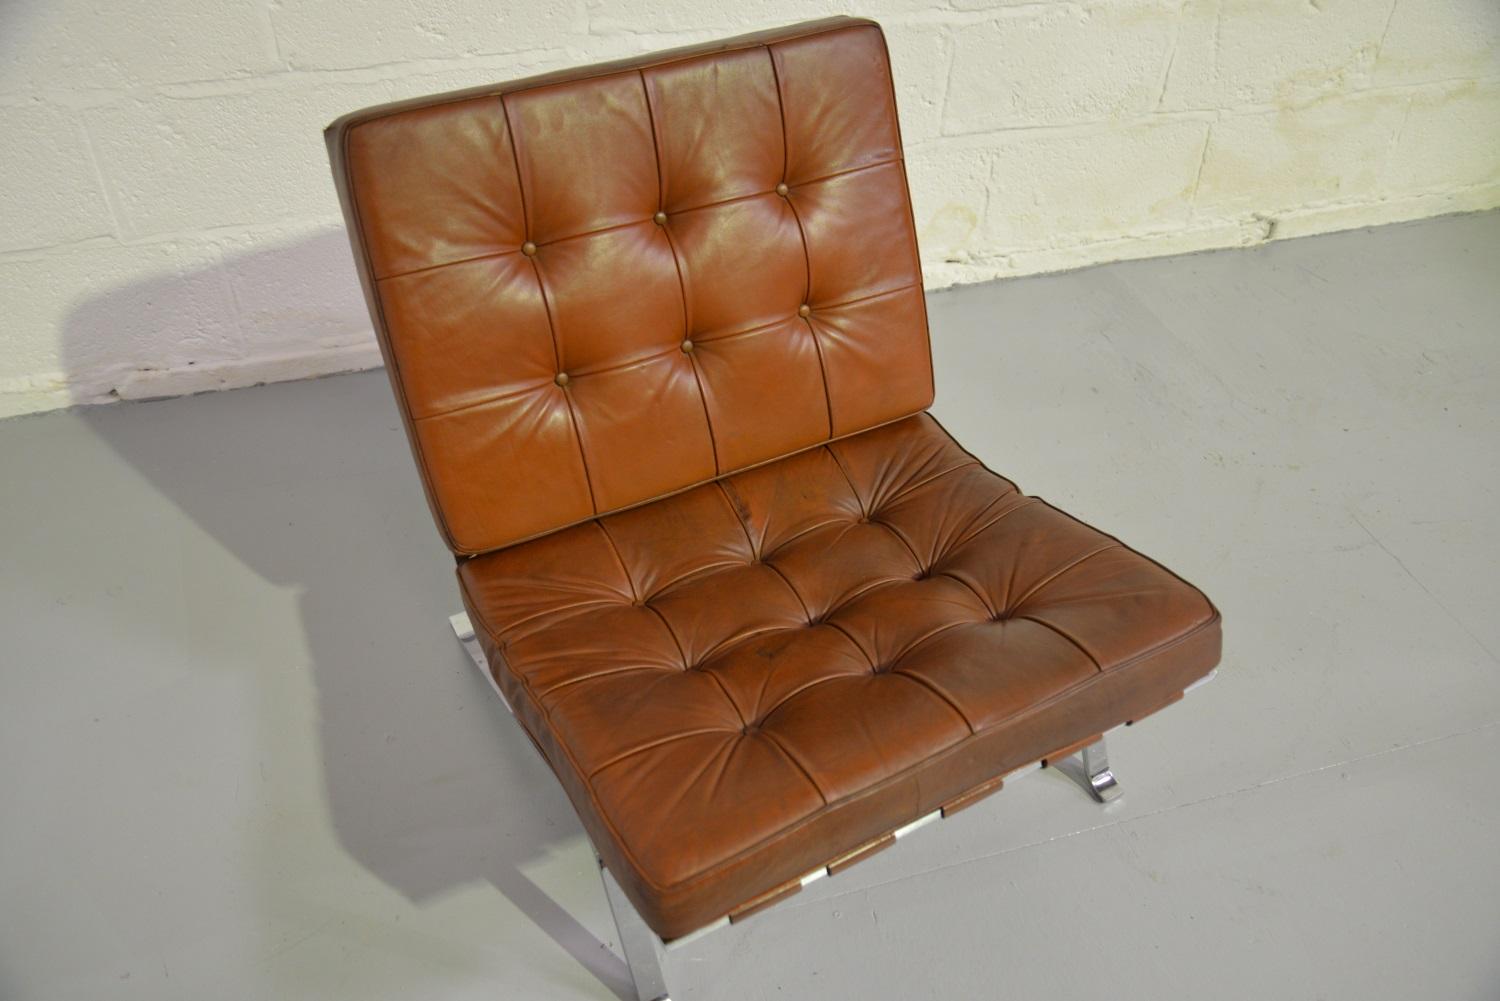 Leather Vintage RH-301 Lounge Chair by Robert Haussmann for De Sede, Switzerland 1954 For Sale